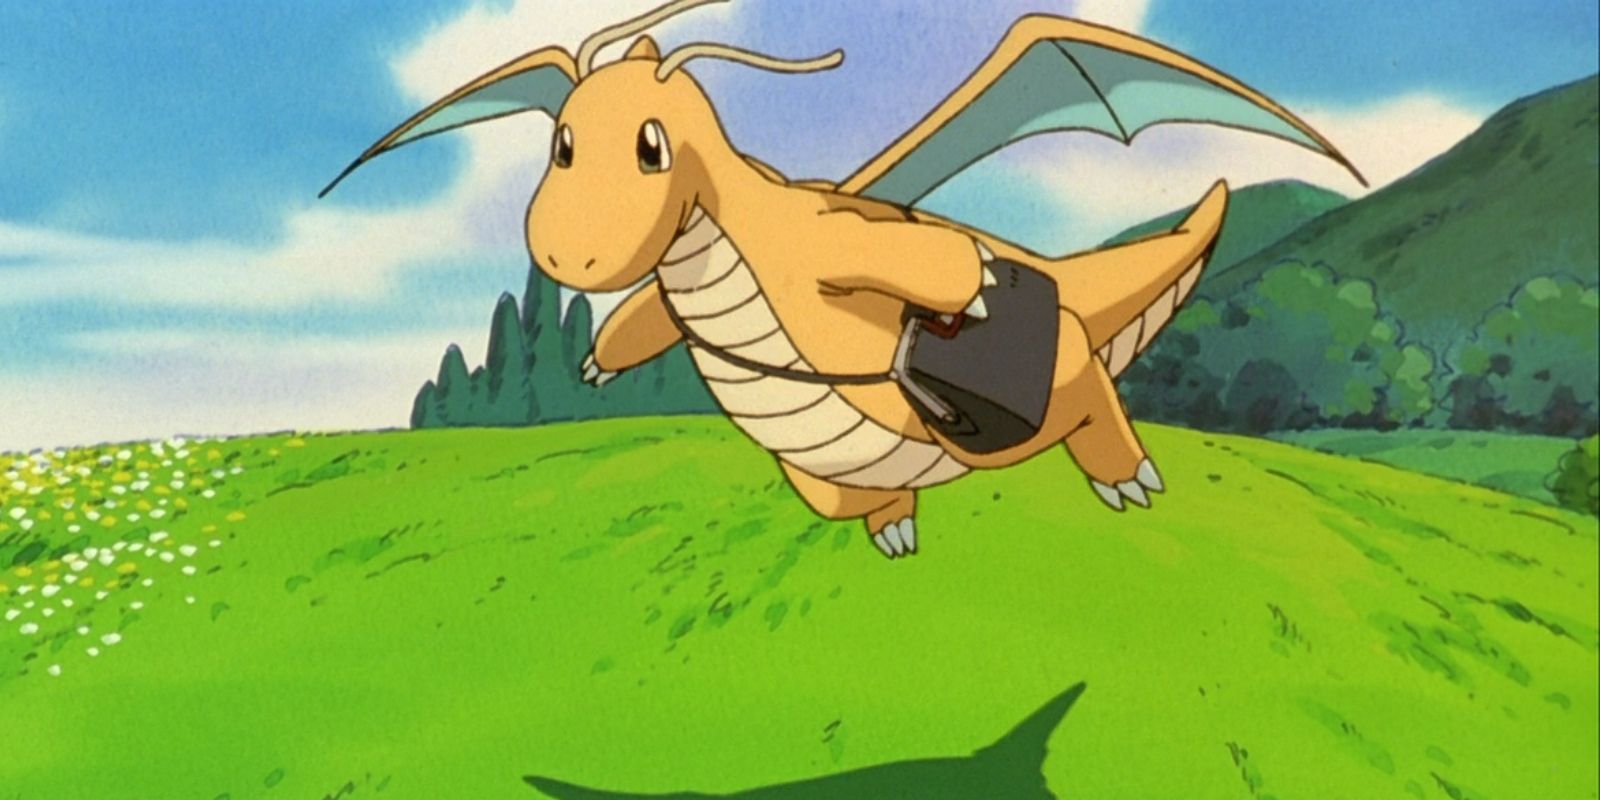 A Dragonite holding a satchel in the Pokemon Anime.